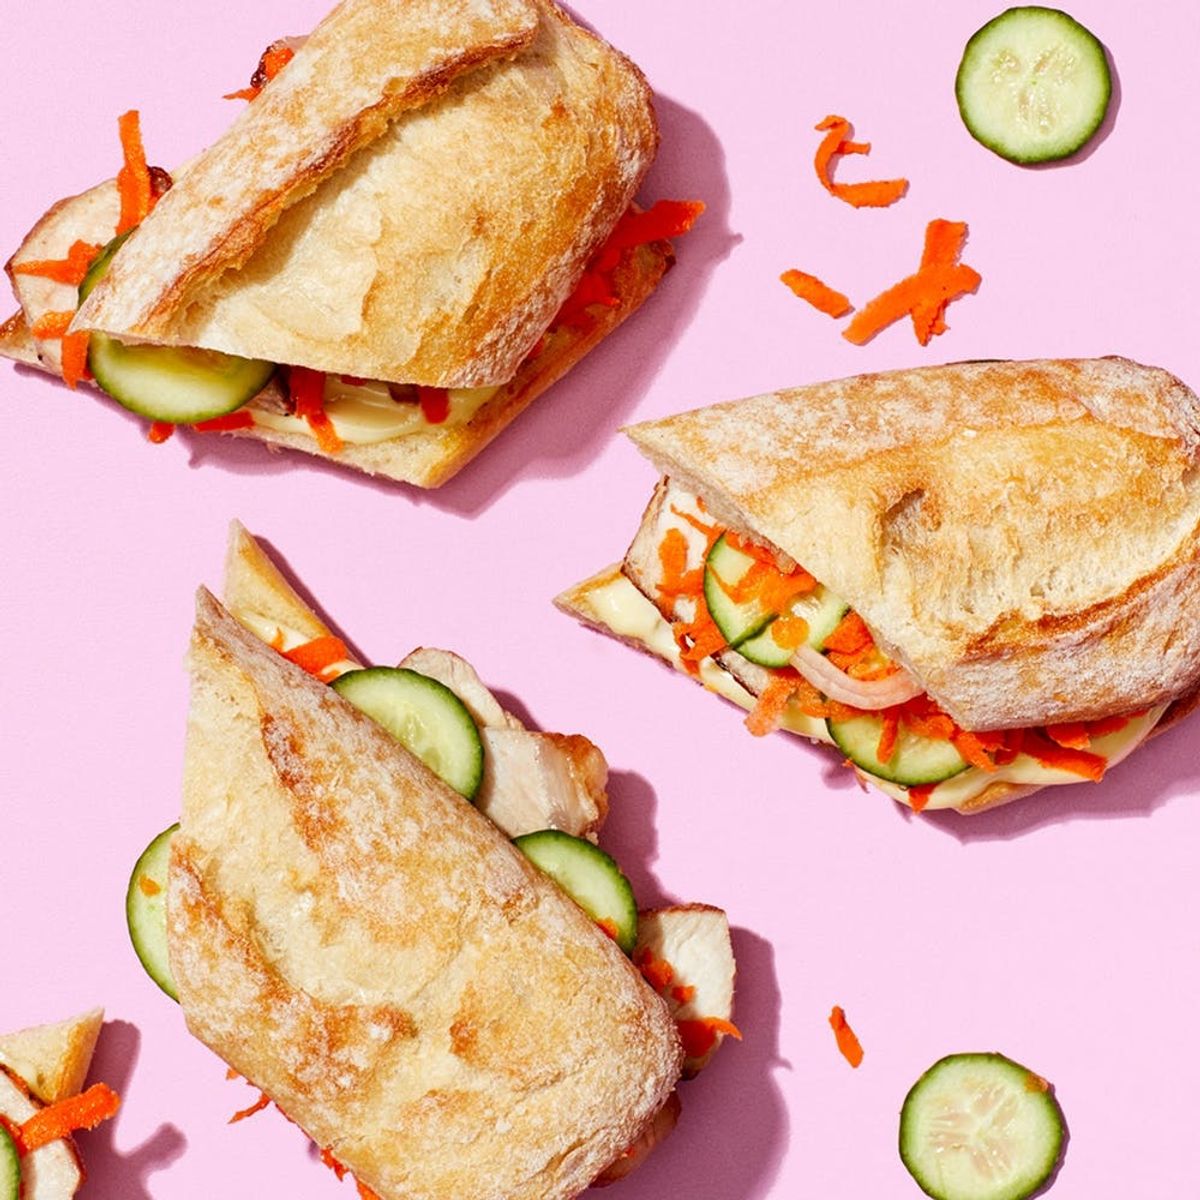 Here’s How to Make a Sandwich the Chrissy Teigen Way